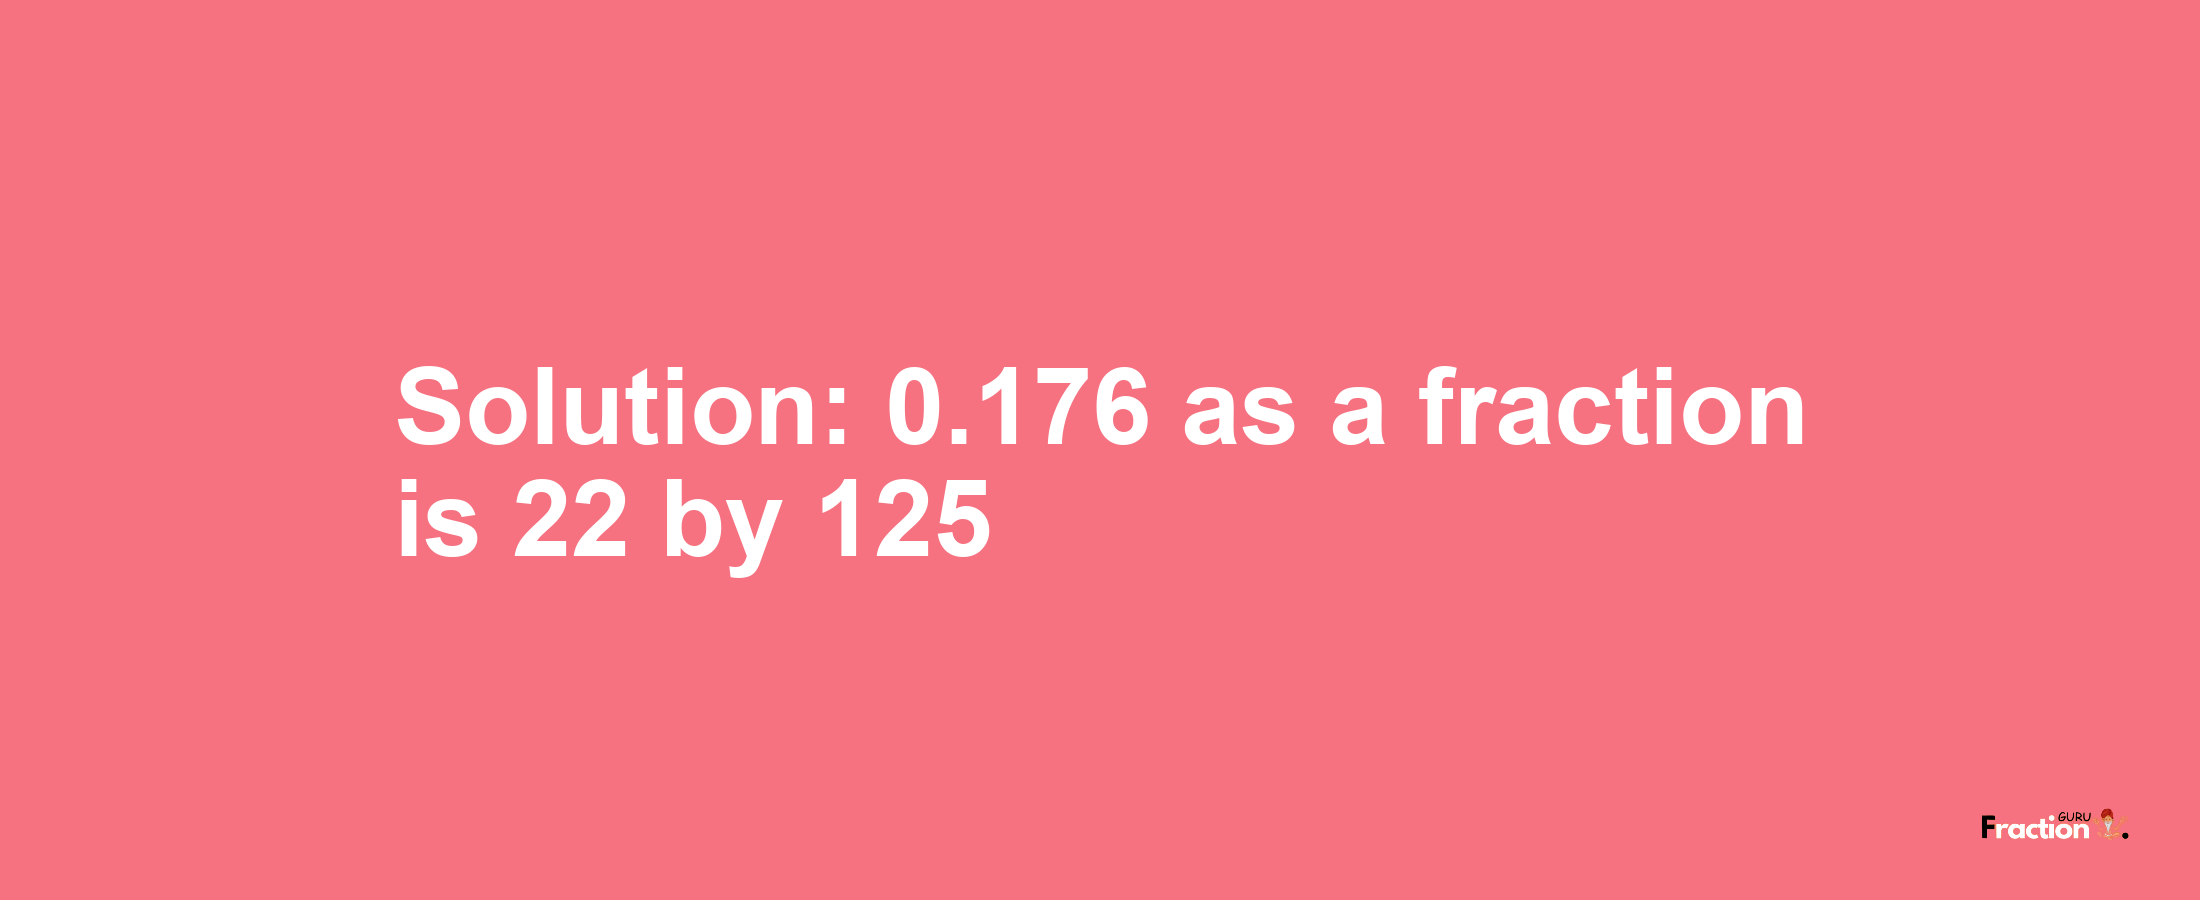 Solution:0.176 as a fraction is 22/125